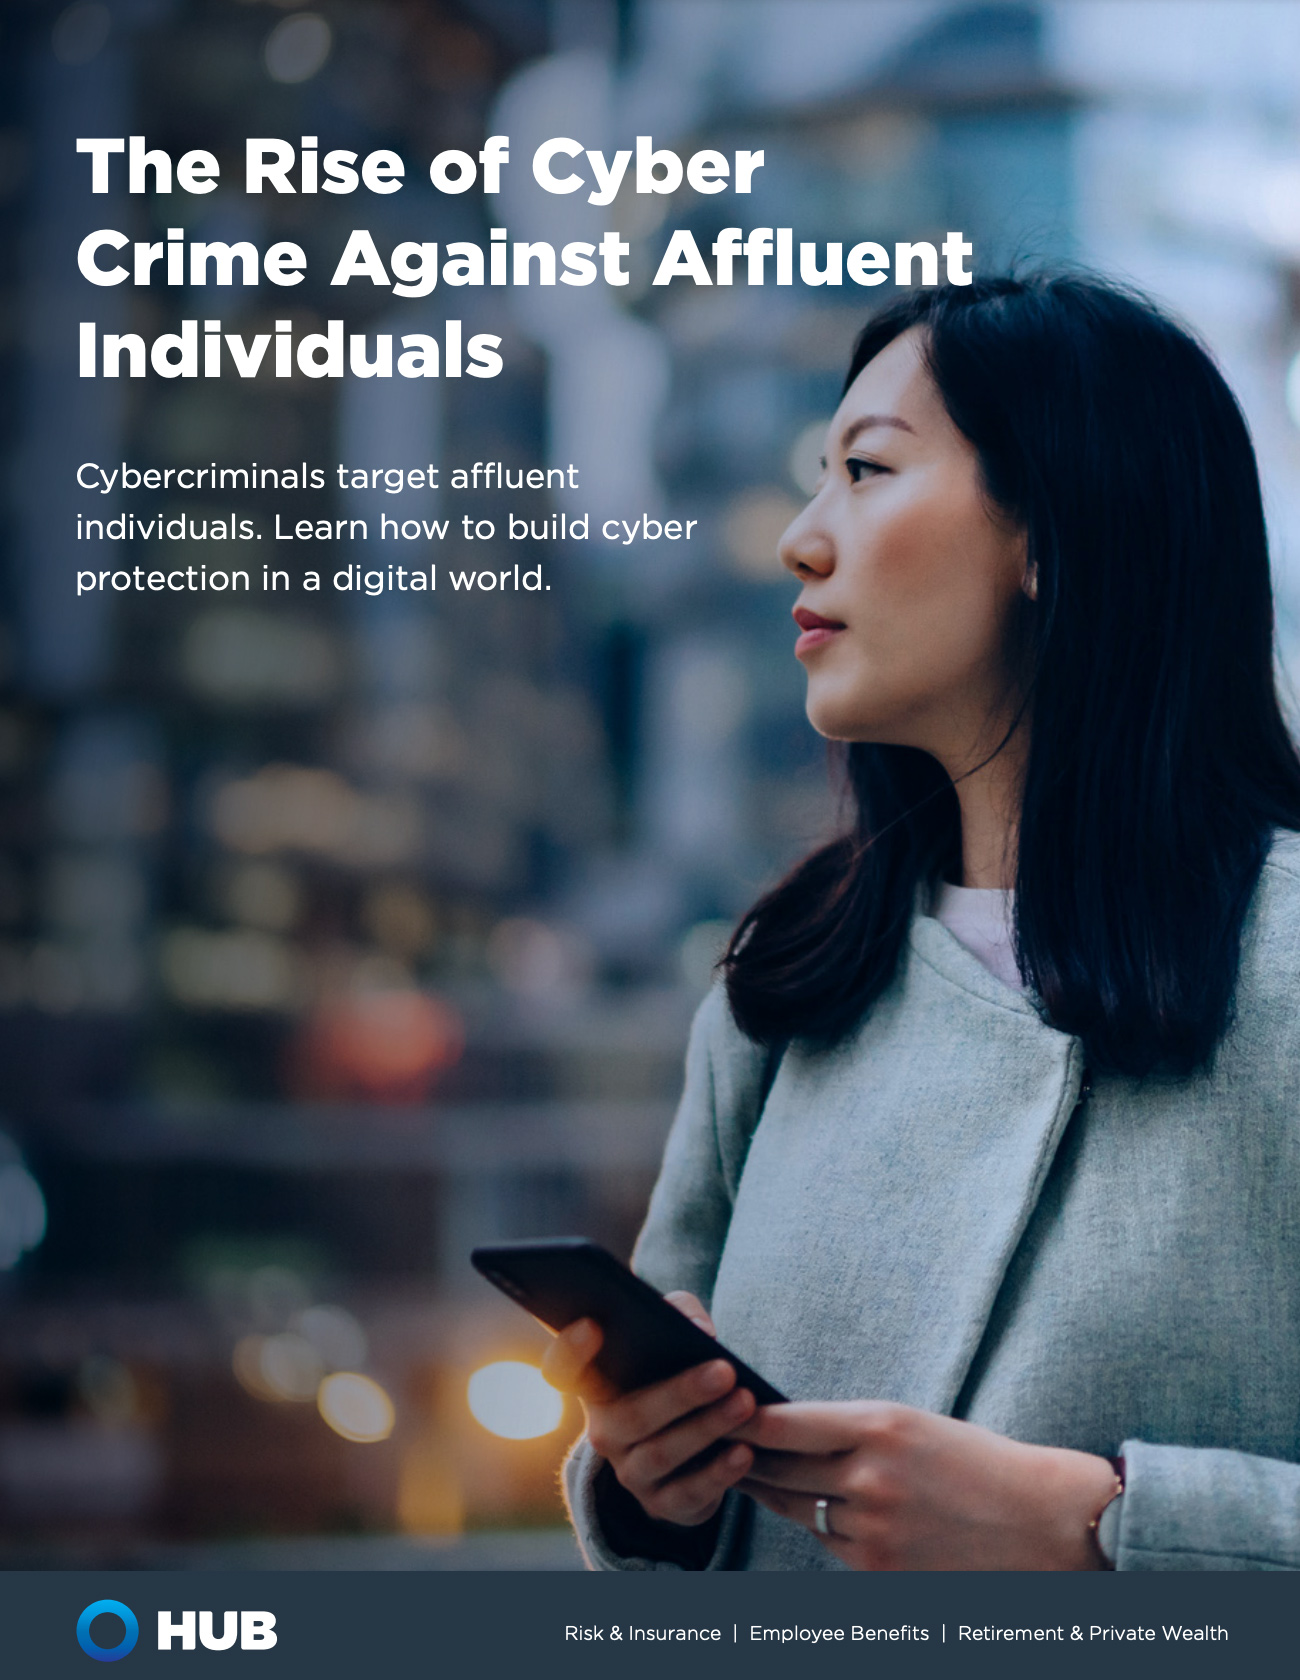 The Rise of Cyber Crime Against Affluent